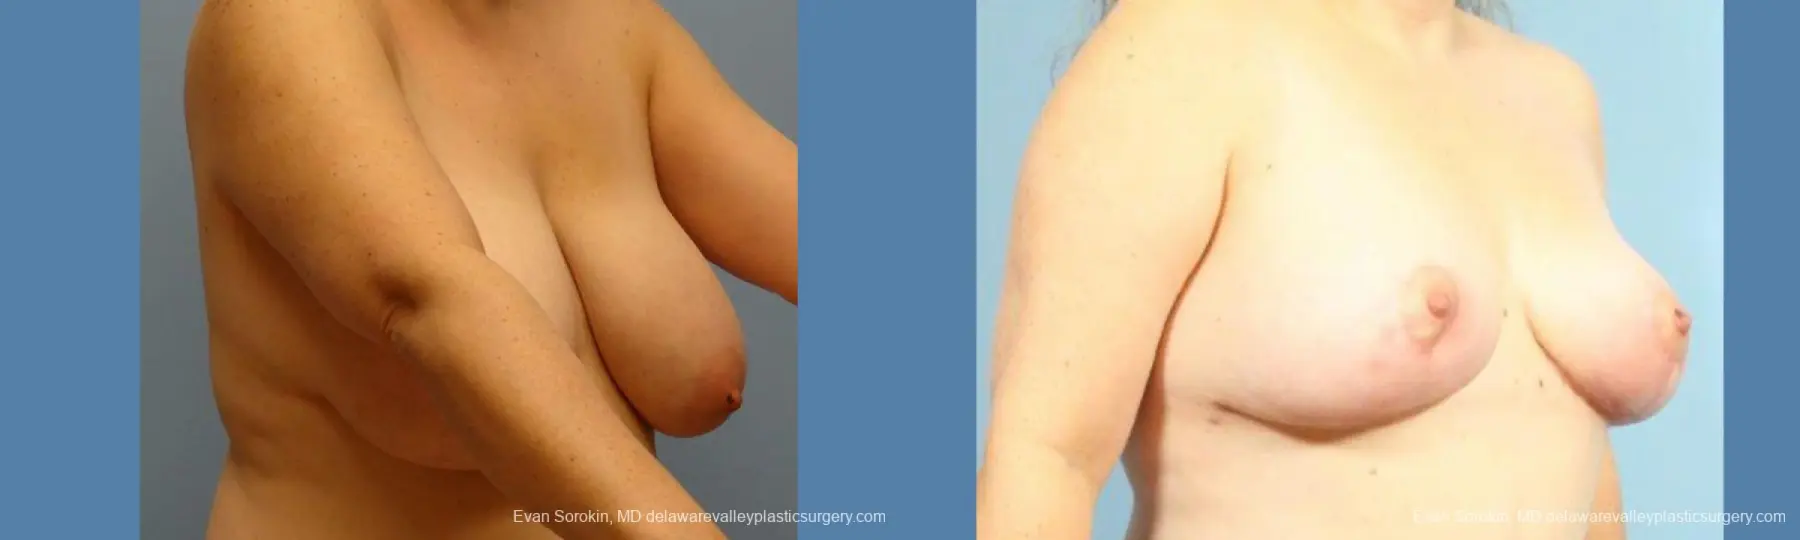 Philadelphia Breast Reduction 9430 - Before and After 3